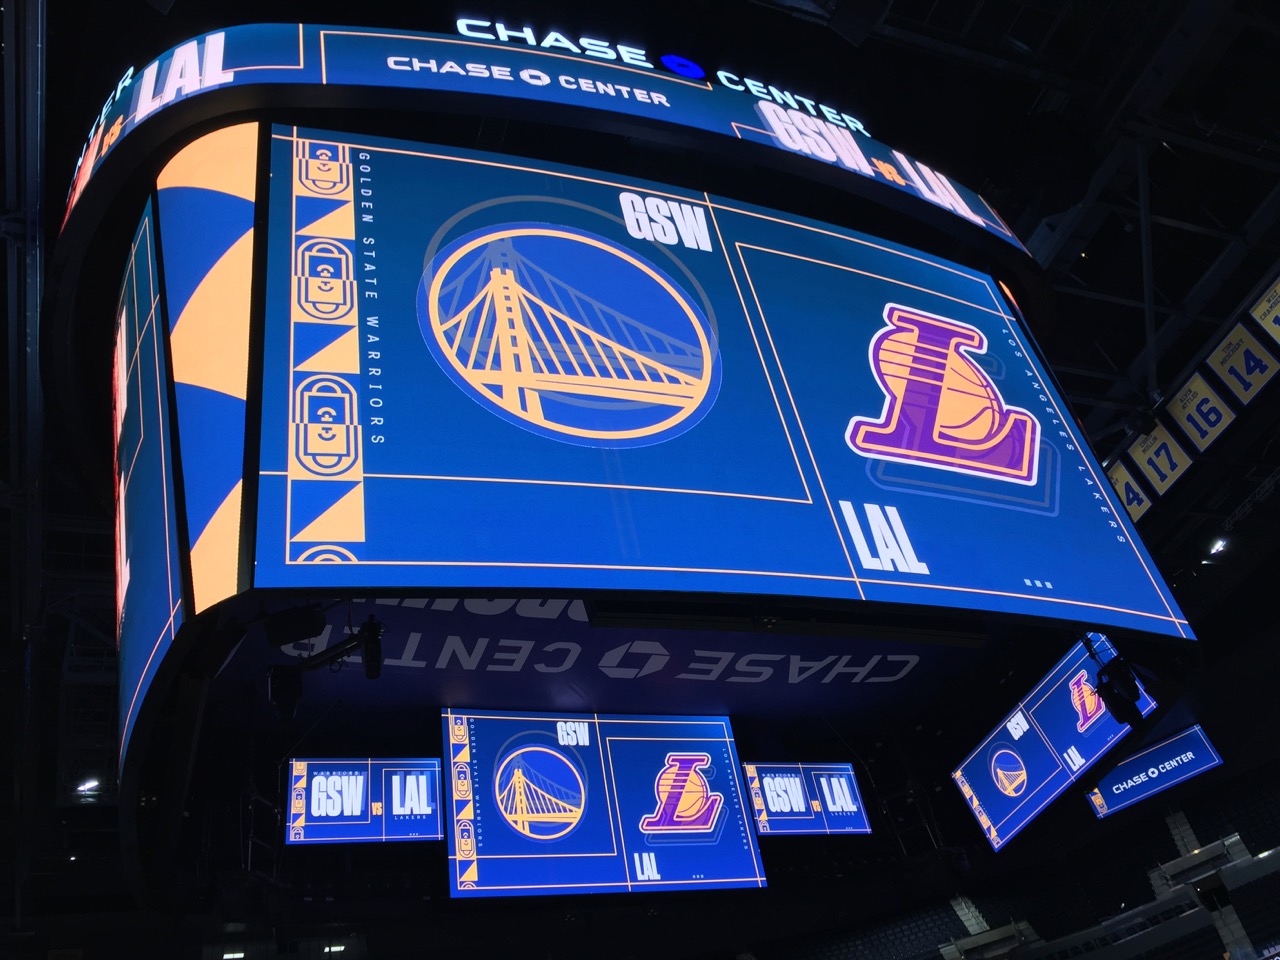 Warriors go ‘biggest’ with Chase Center digital displays